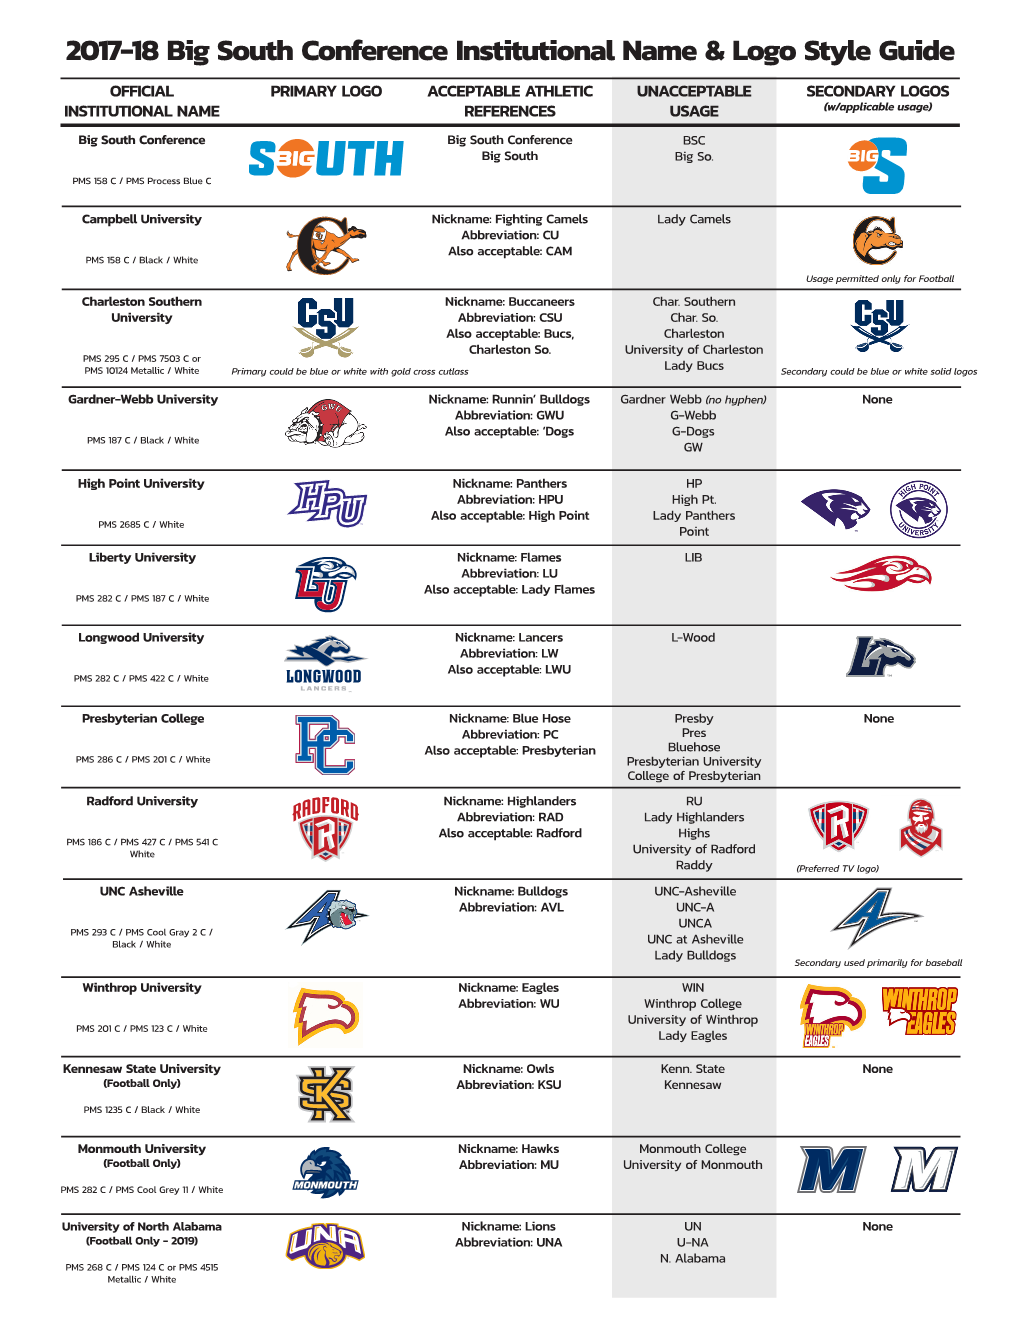 2017-18 Big South Conference Institutional Name & Logo Style Guide